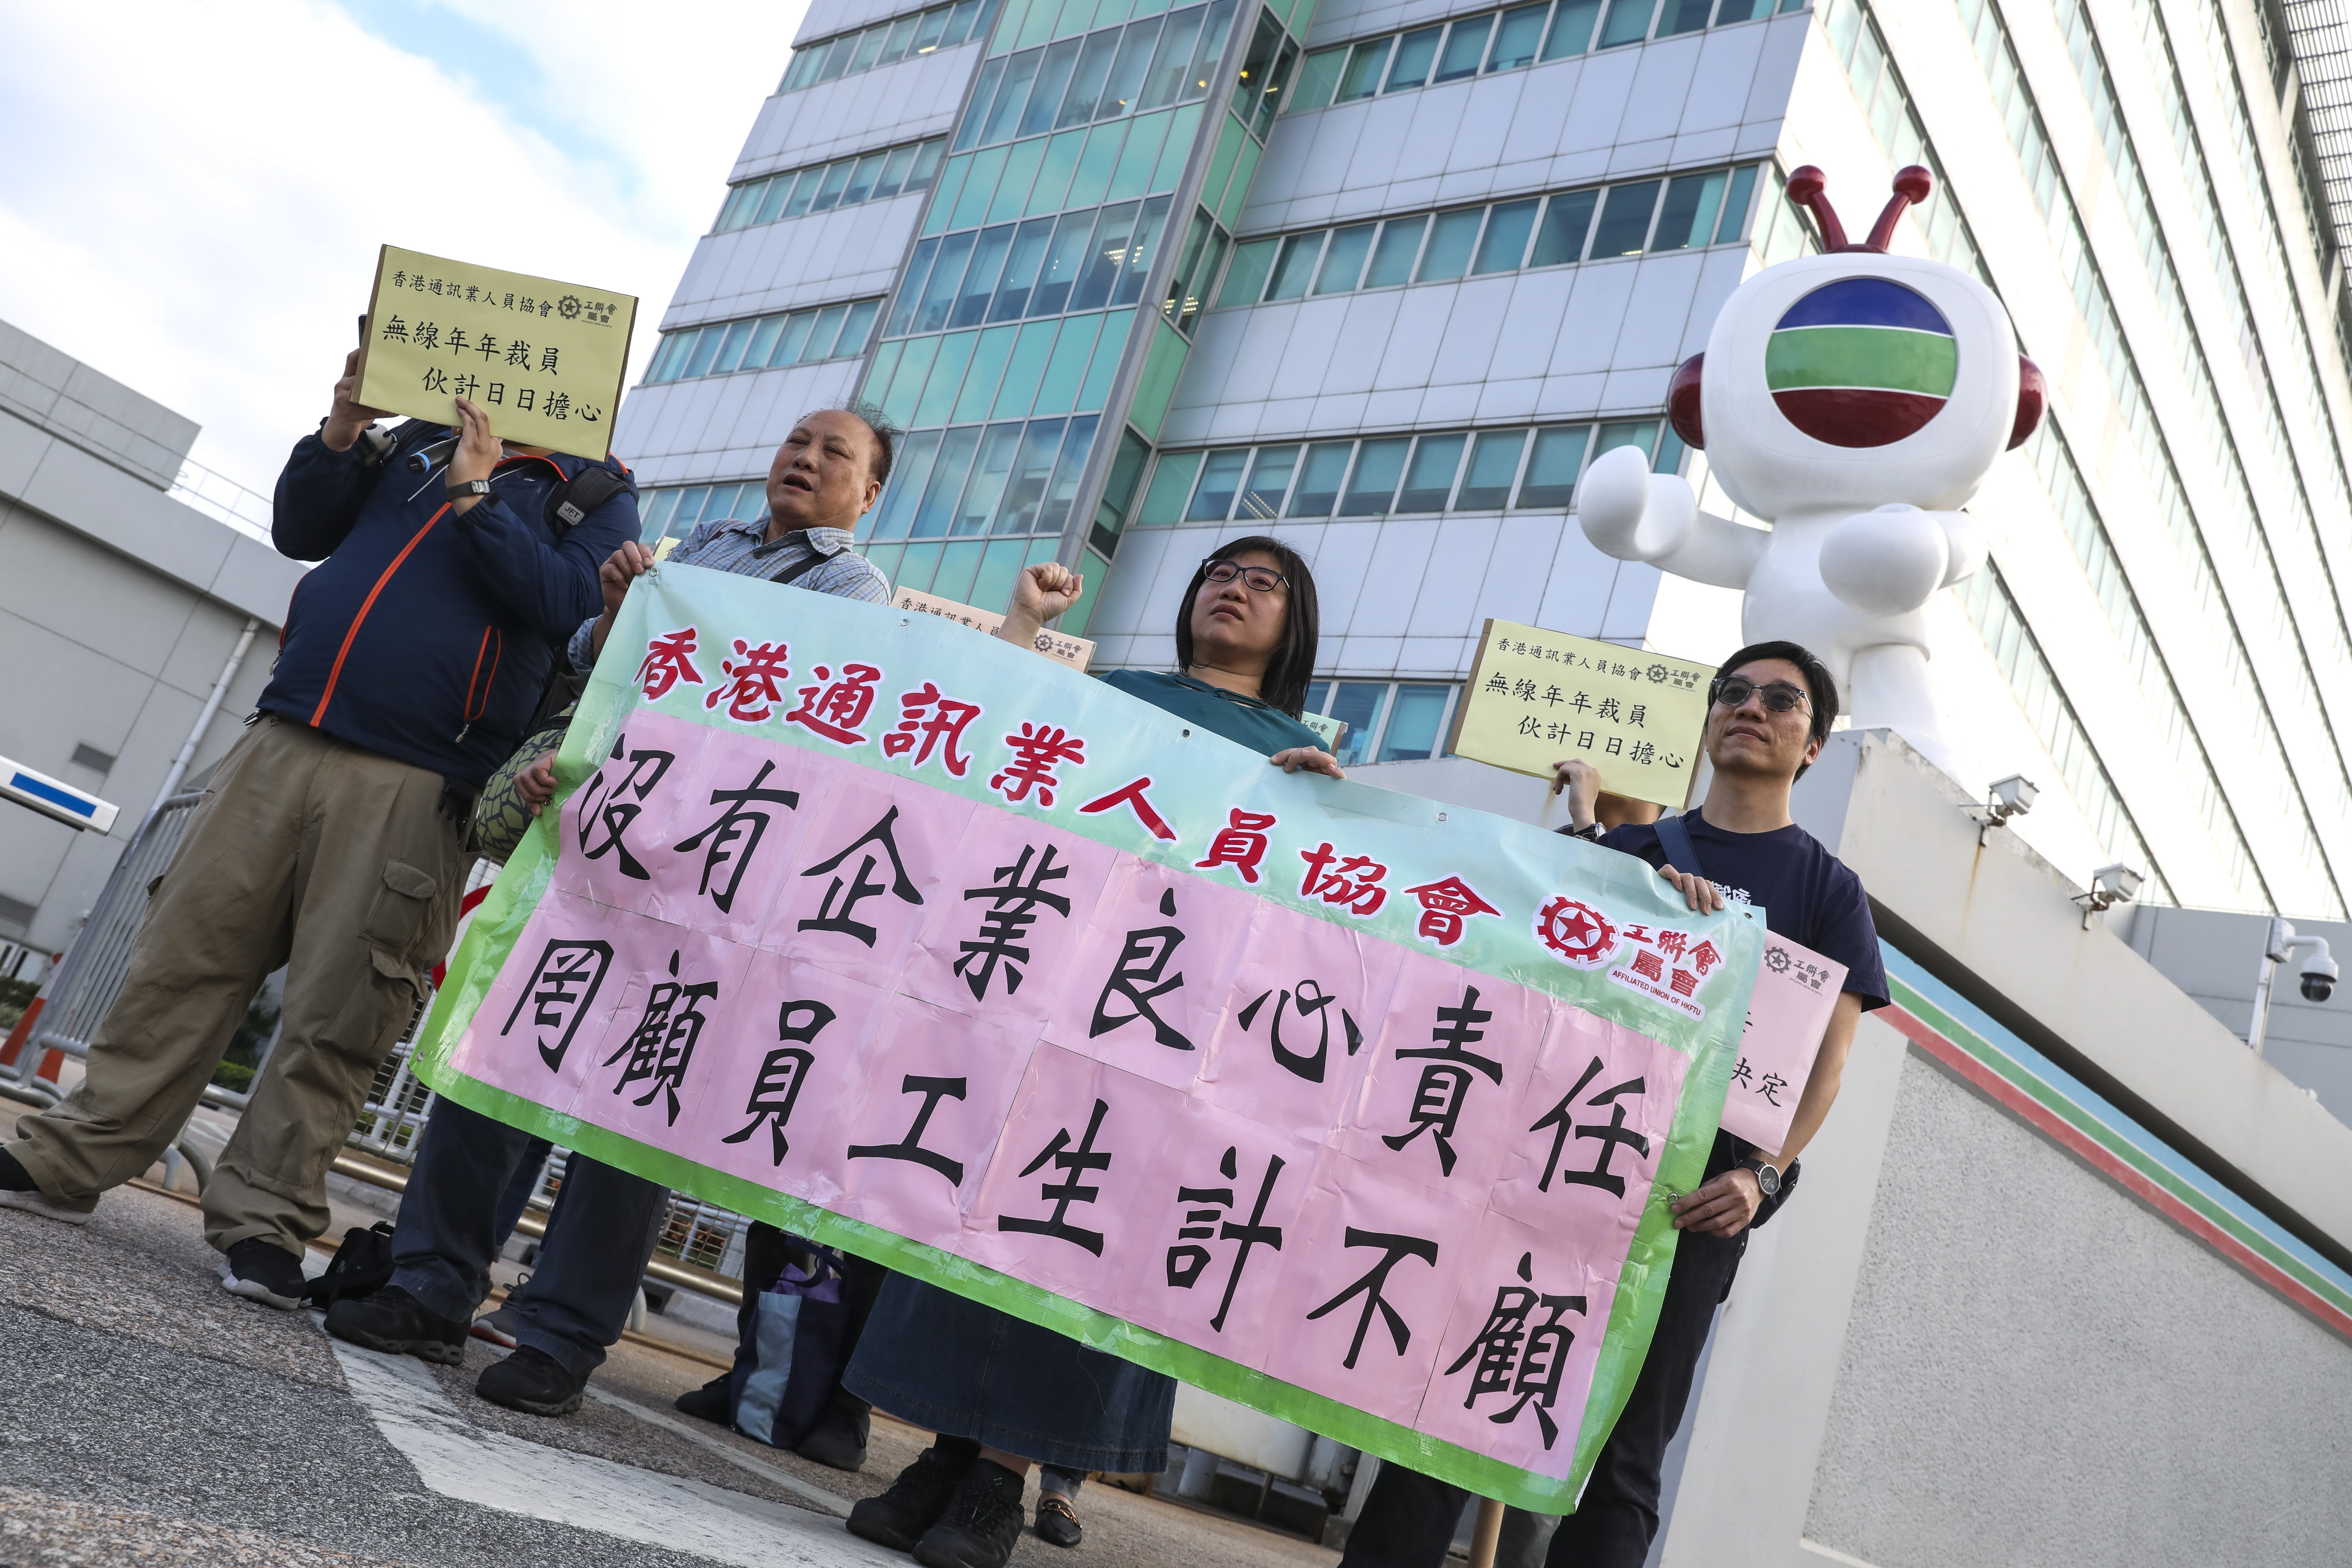 Hong Kong Communication Industry Employees Association holds a protest outside TVB City building in Tseung Kwan O on December 17, 2019. Photo: Dickson Lee